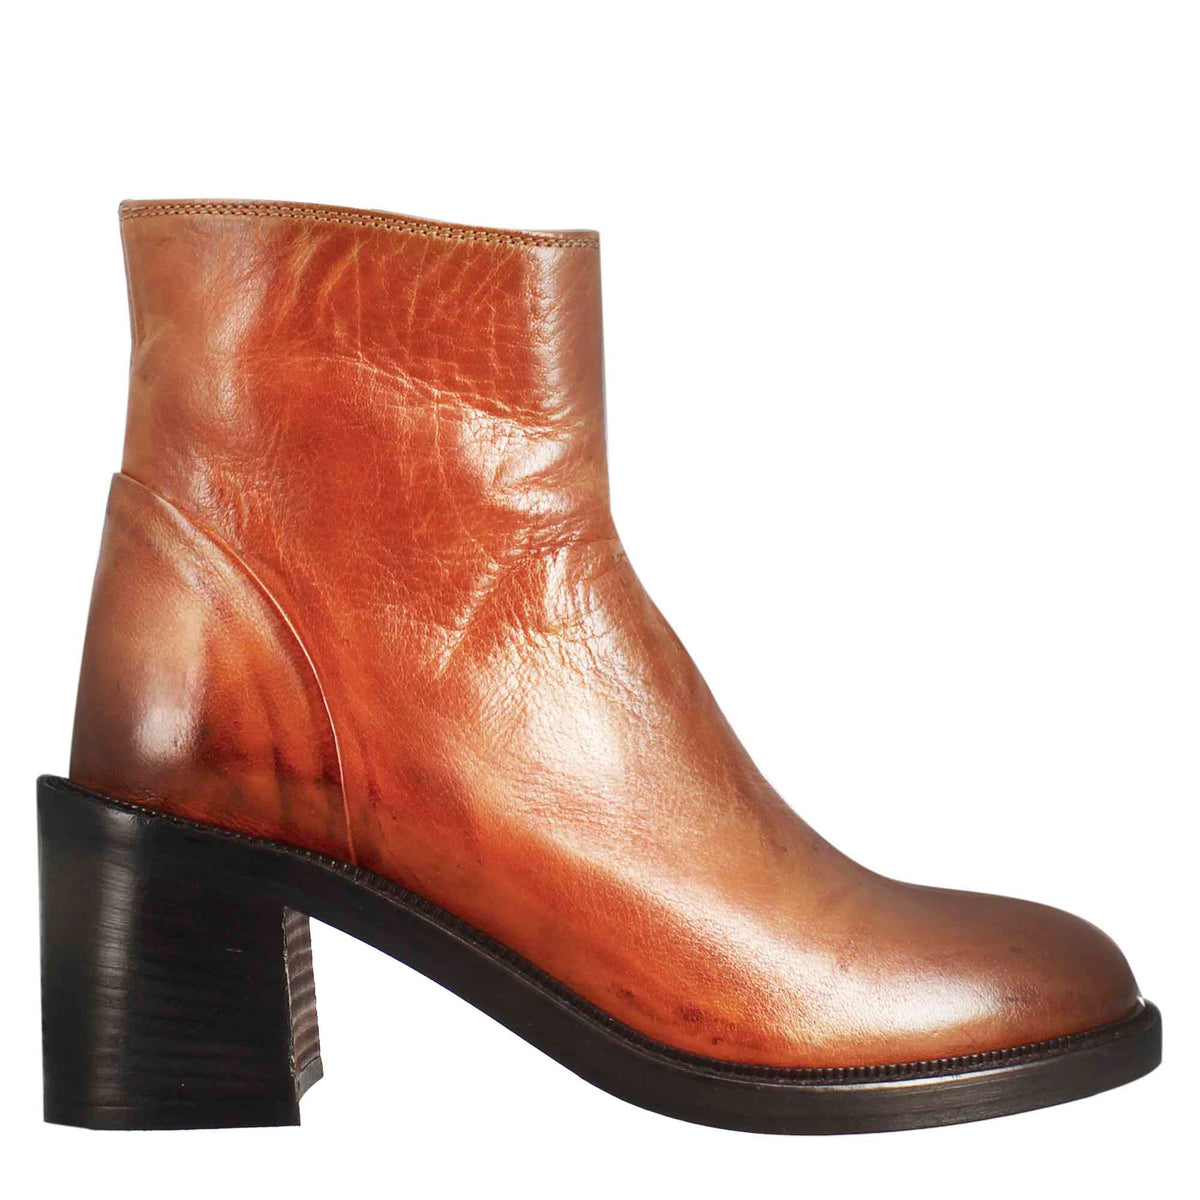 Women's low diver boot with heel in dark brown washed leather